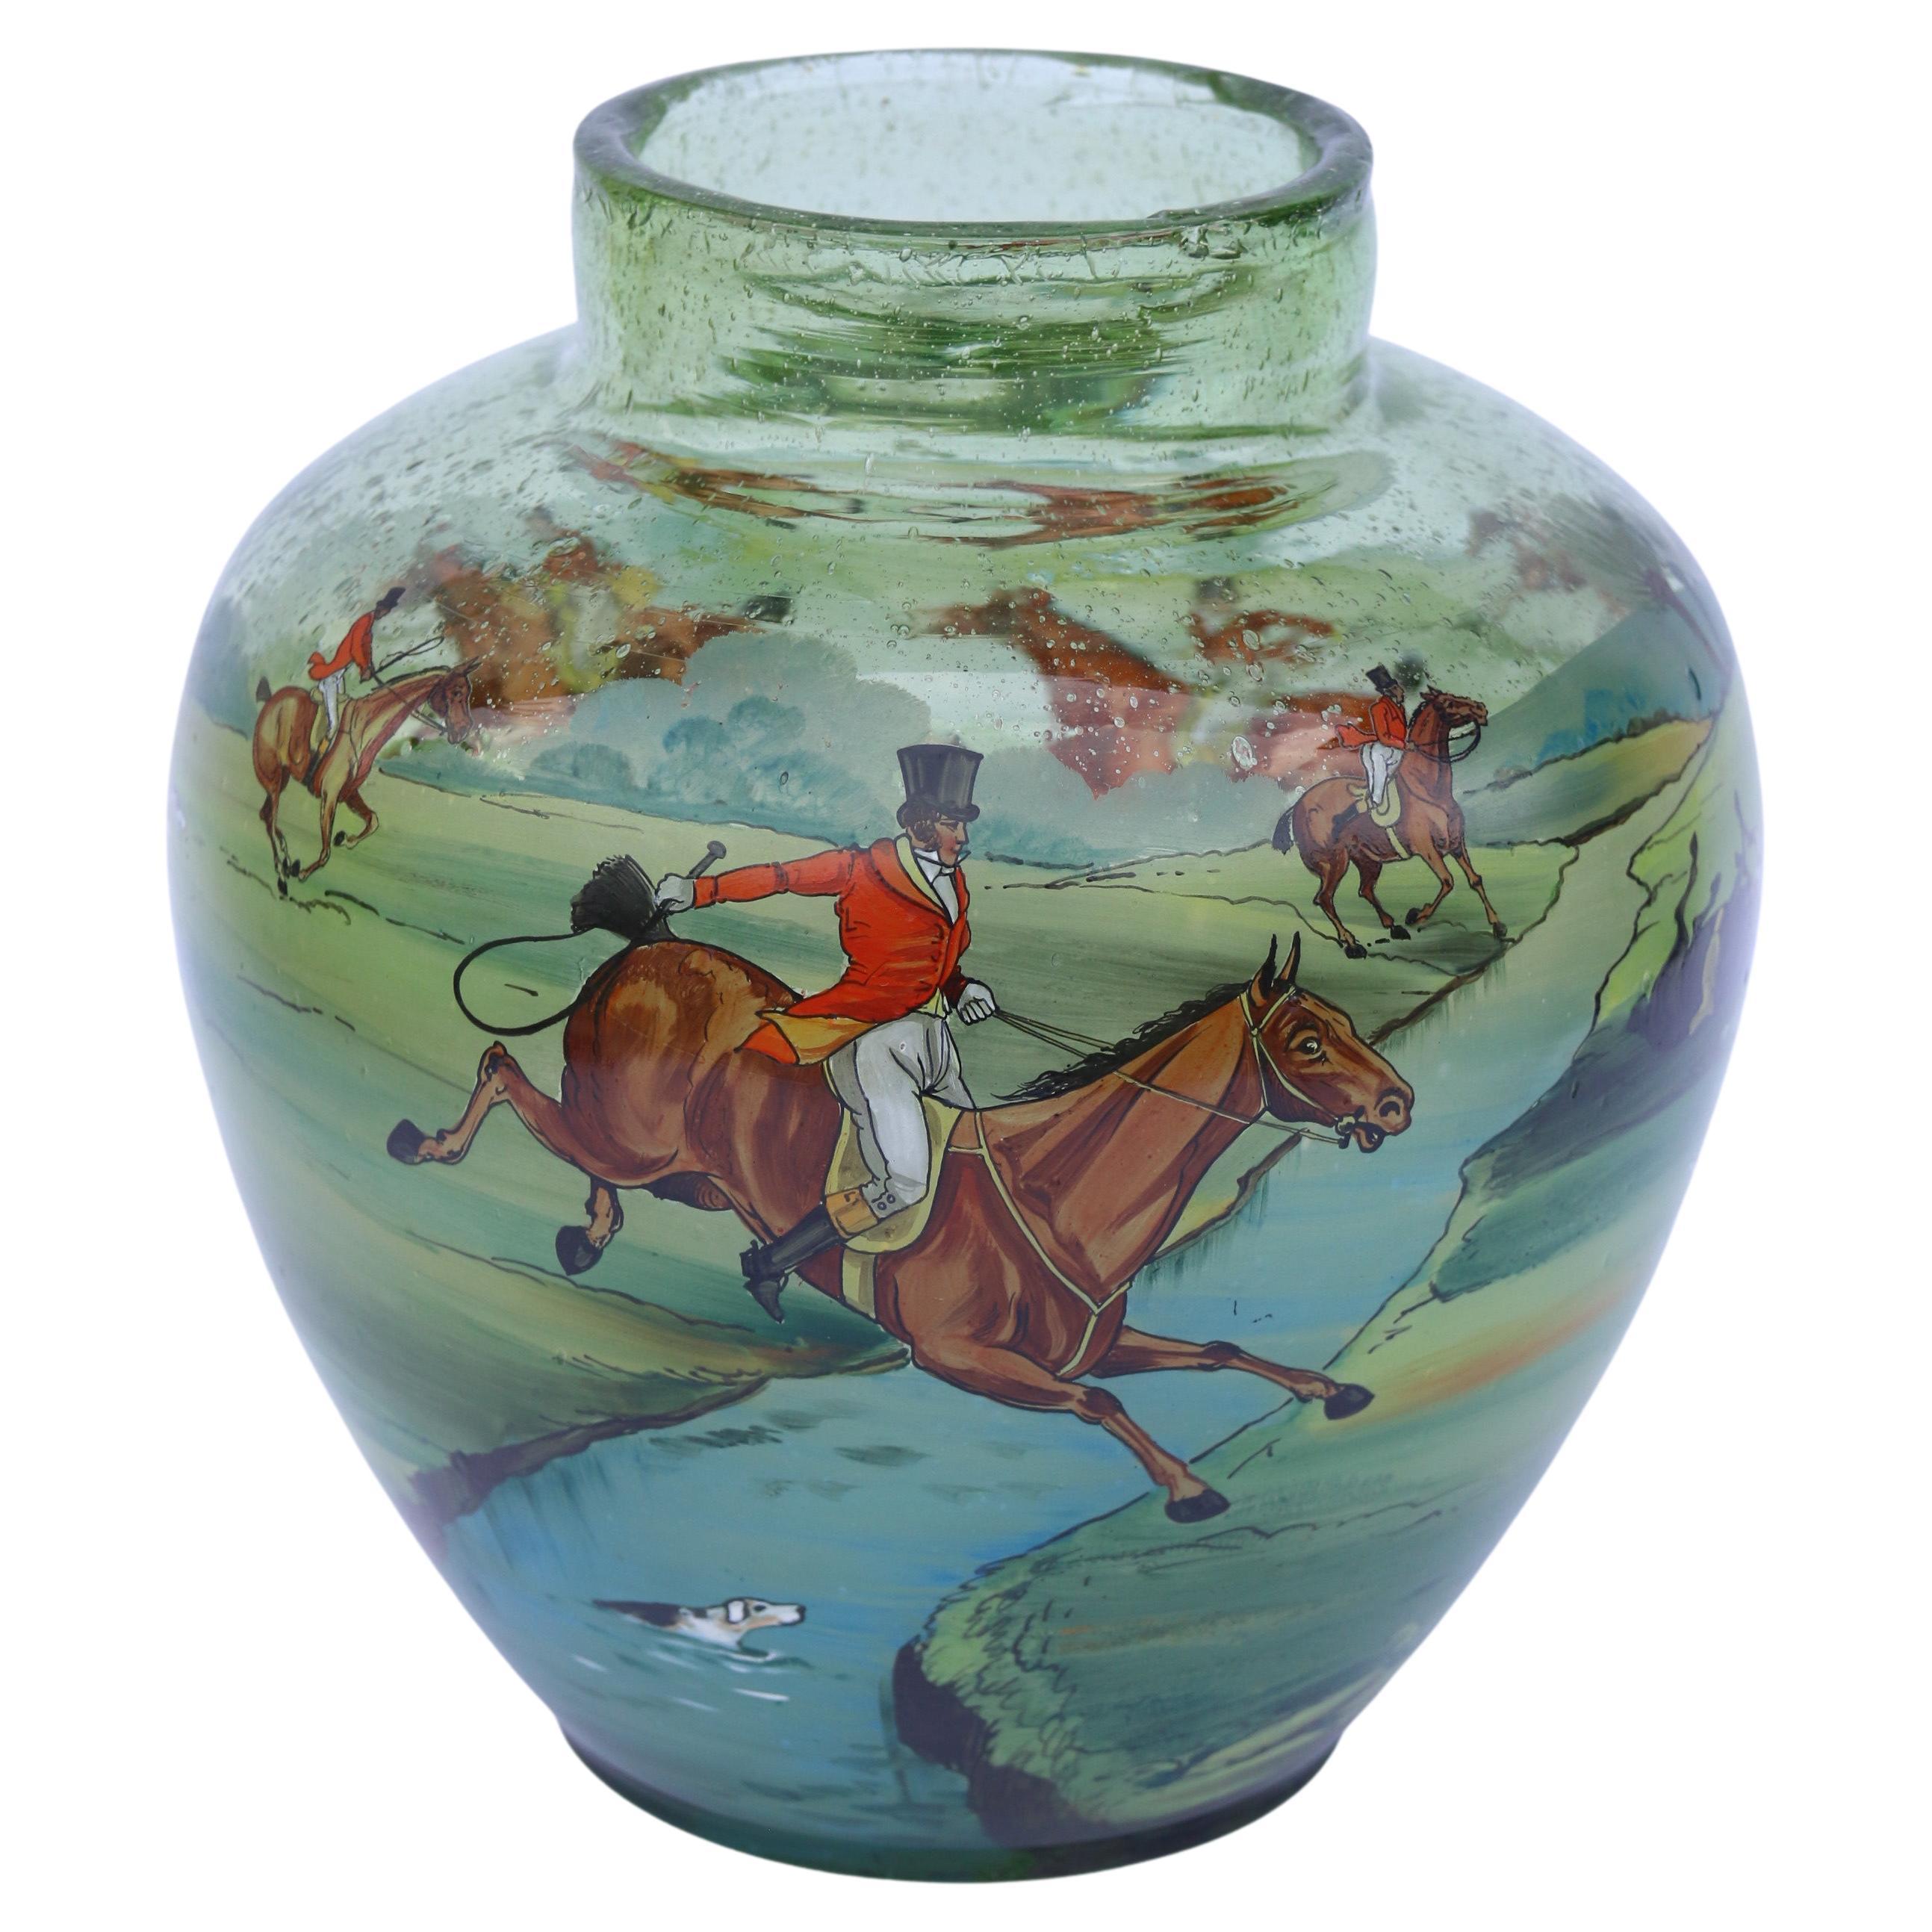 Bohemian Hand Painted and Enamelled Glass Vase Depicting a Fox Hunting Scene